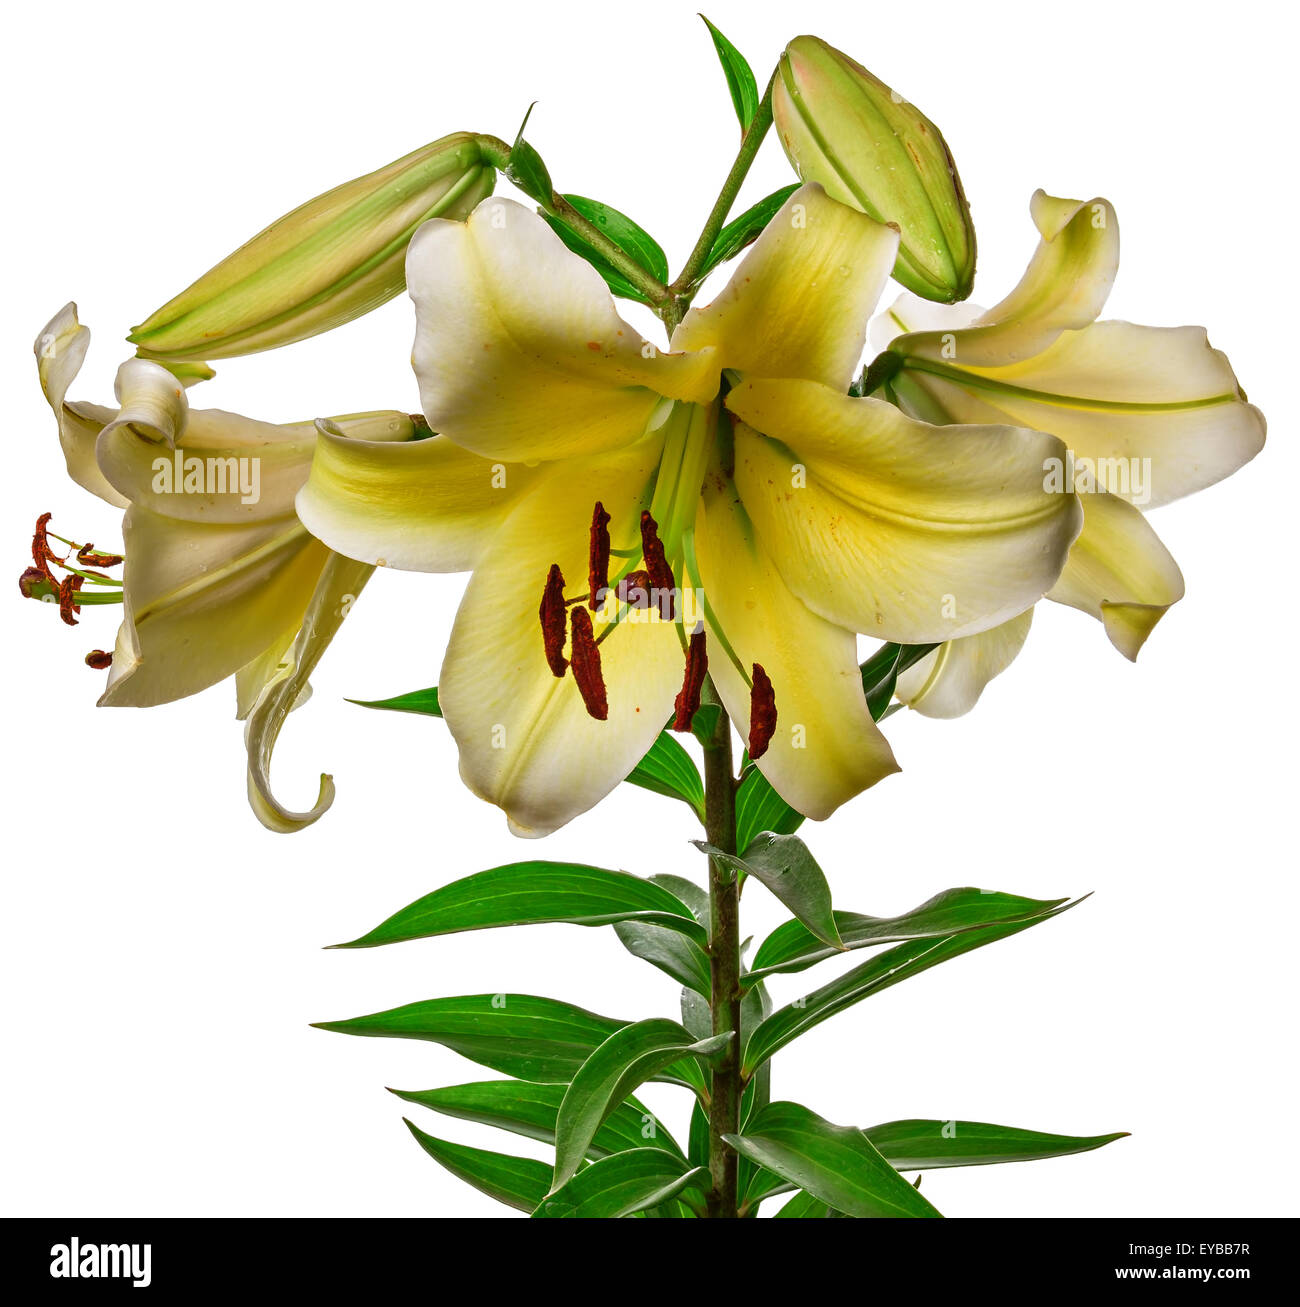 the flowers lily isolated on white background Stock Photo - Alamy